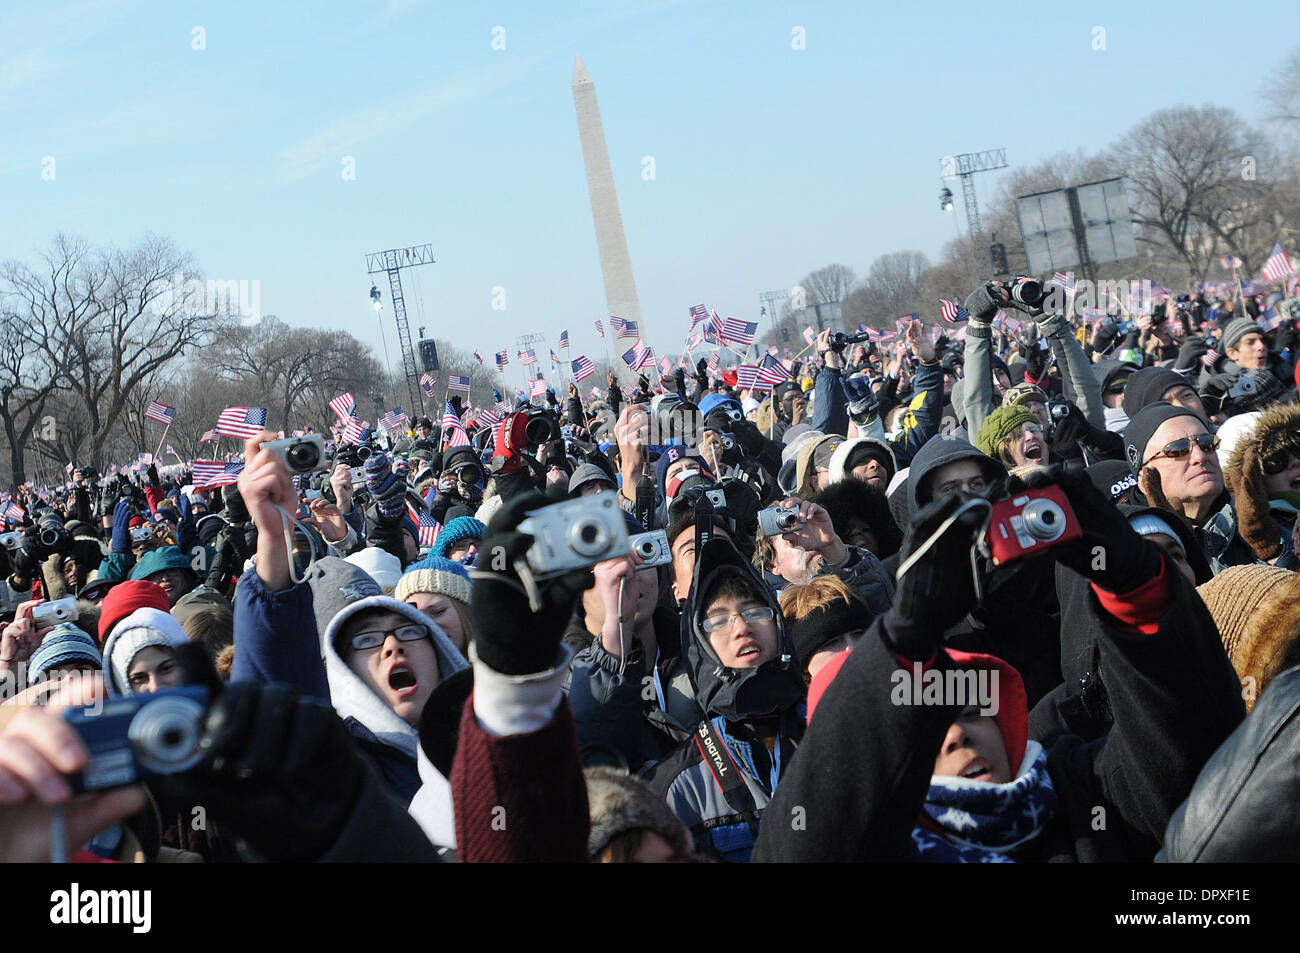 Jan 20, 2009 - Washington, District of Columbia, USA - Crowds of people gather on the National Mall while waiting for the historic inauguration of Democrat Obama as the 44th president of the United States. Washington monument behind the crowd. (Credit Image: © Laura Segall/ZUMA Press) Stock Photo